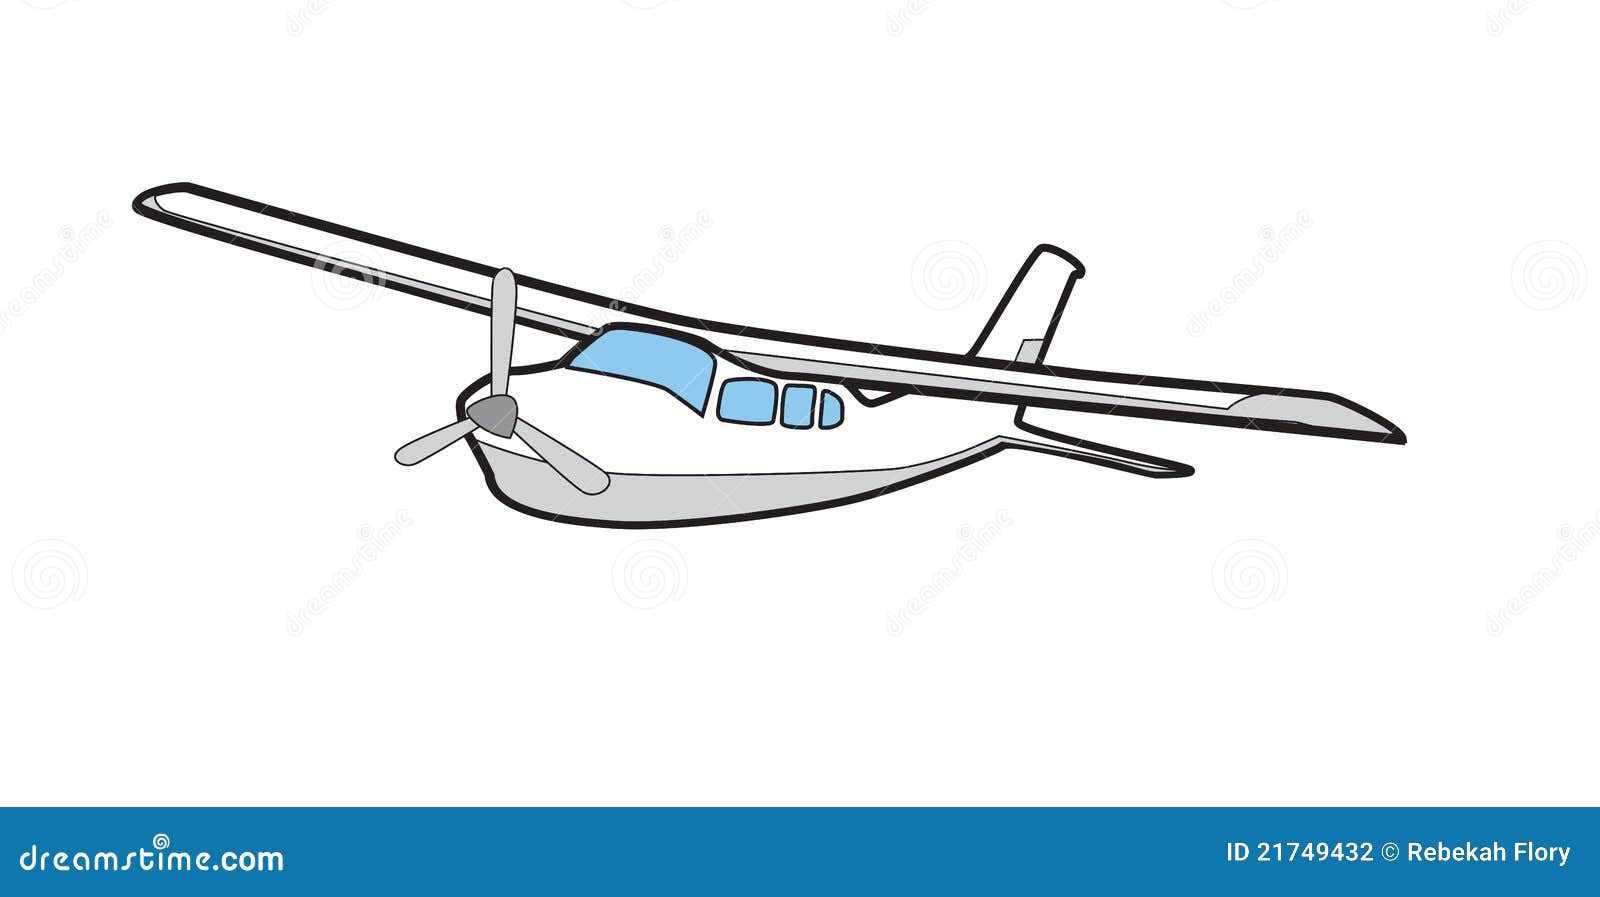 clipart cessna airplane - photo #13